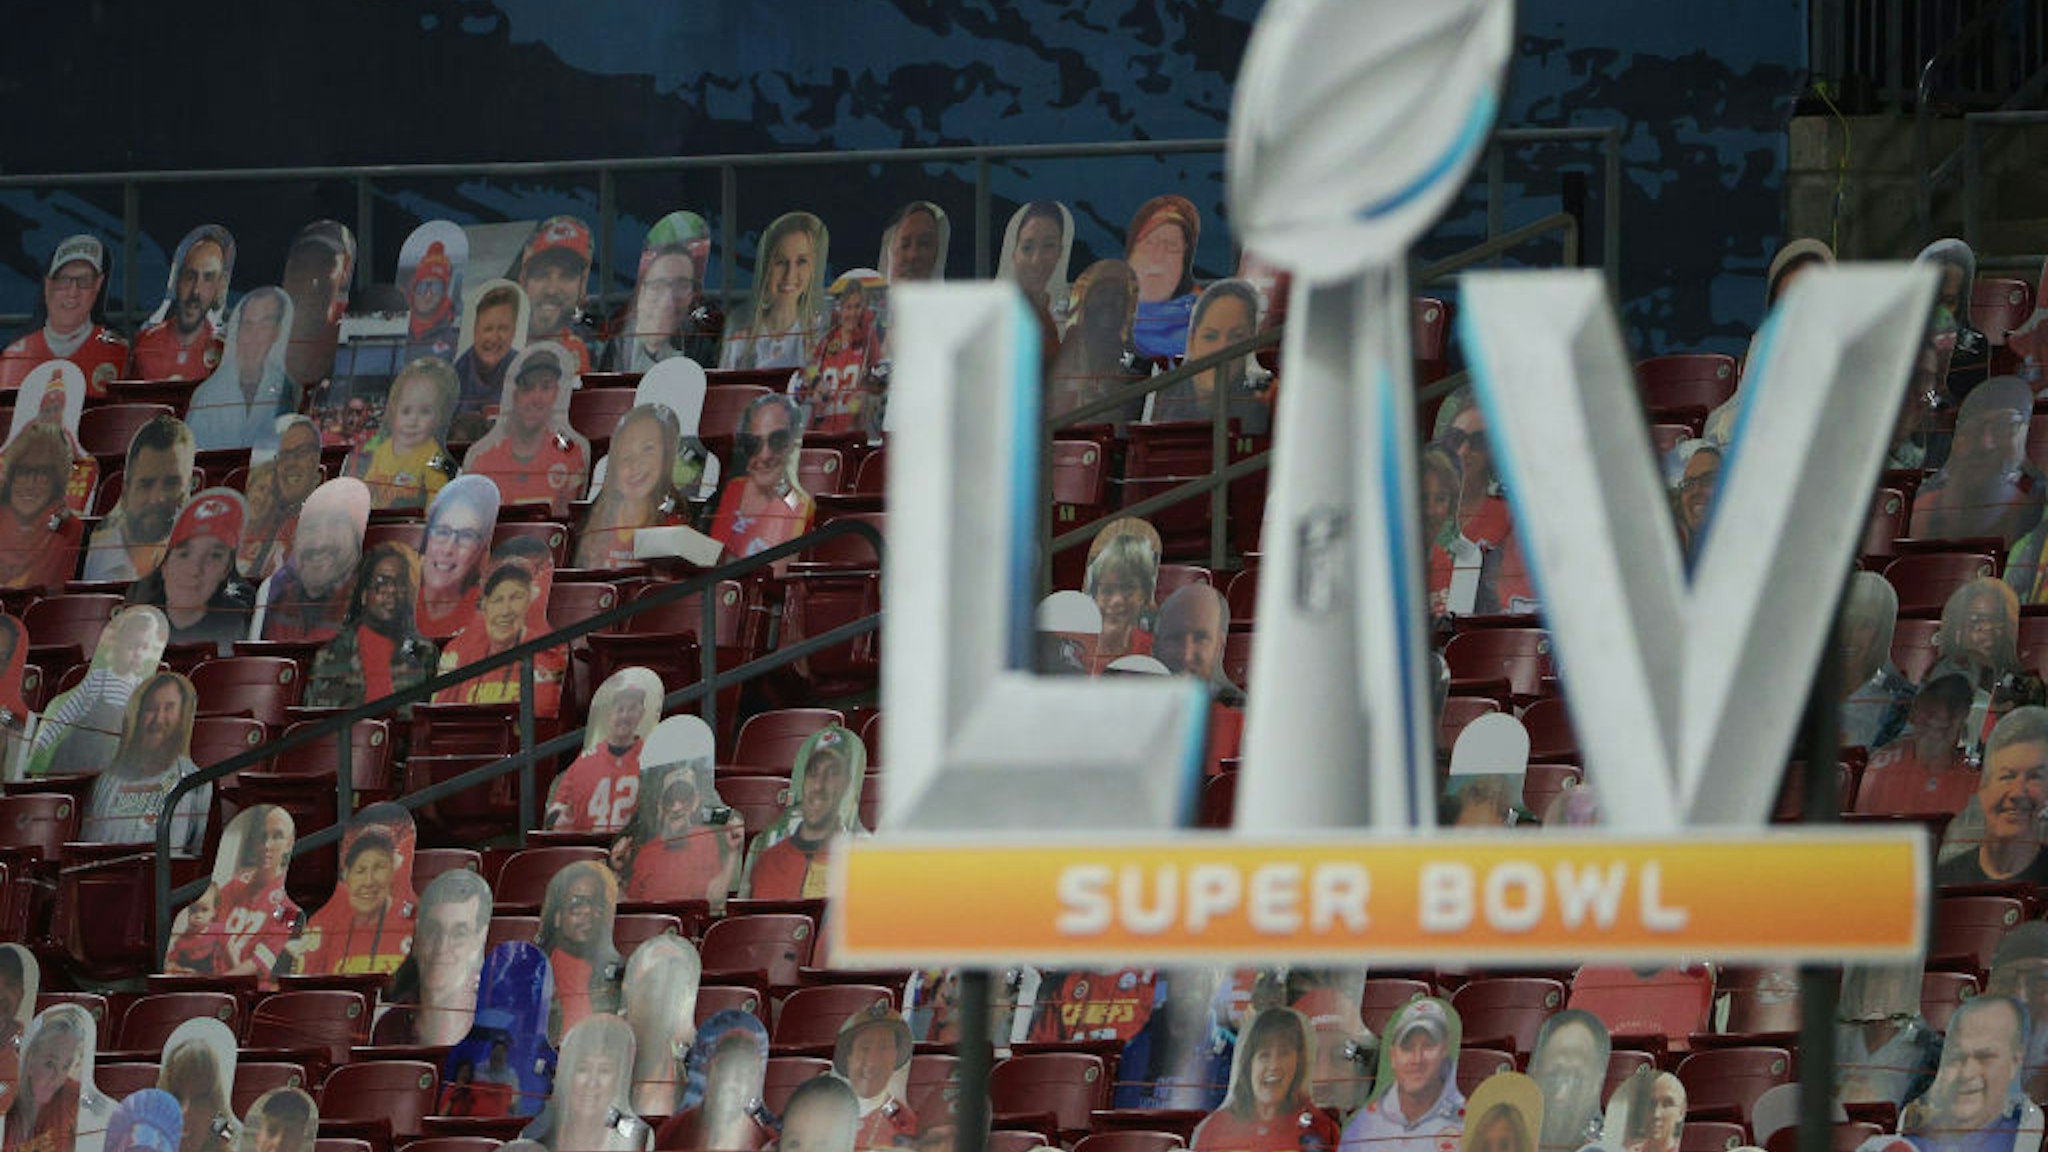 TAMPA, FLORIDA - FEBRUARY 07: A Super Bowl decal is seen ahead of cardboard fans in Super Bowl LV between the Tampa Bay Buccaneers and the Kansas City Chiefs at Raymond James Stadium on February 07, 2021 in Tampa, Florida. (Photo by Patrick Smith/Getty Images)